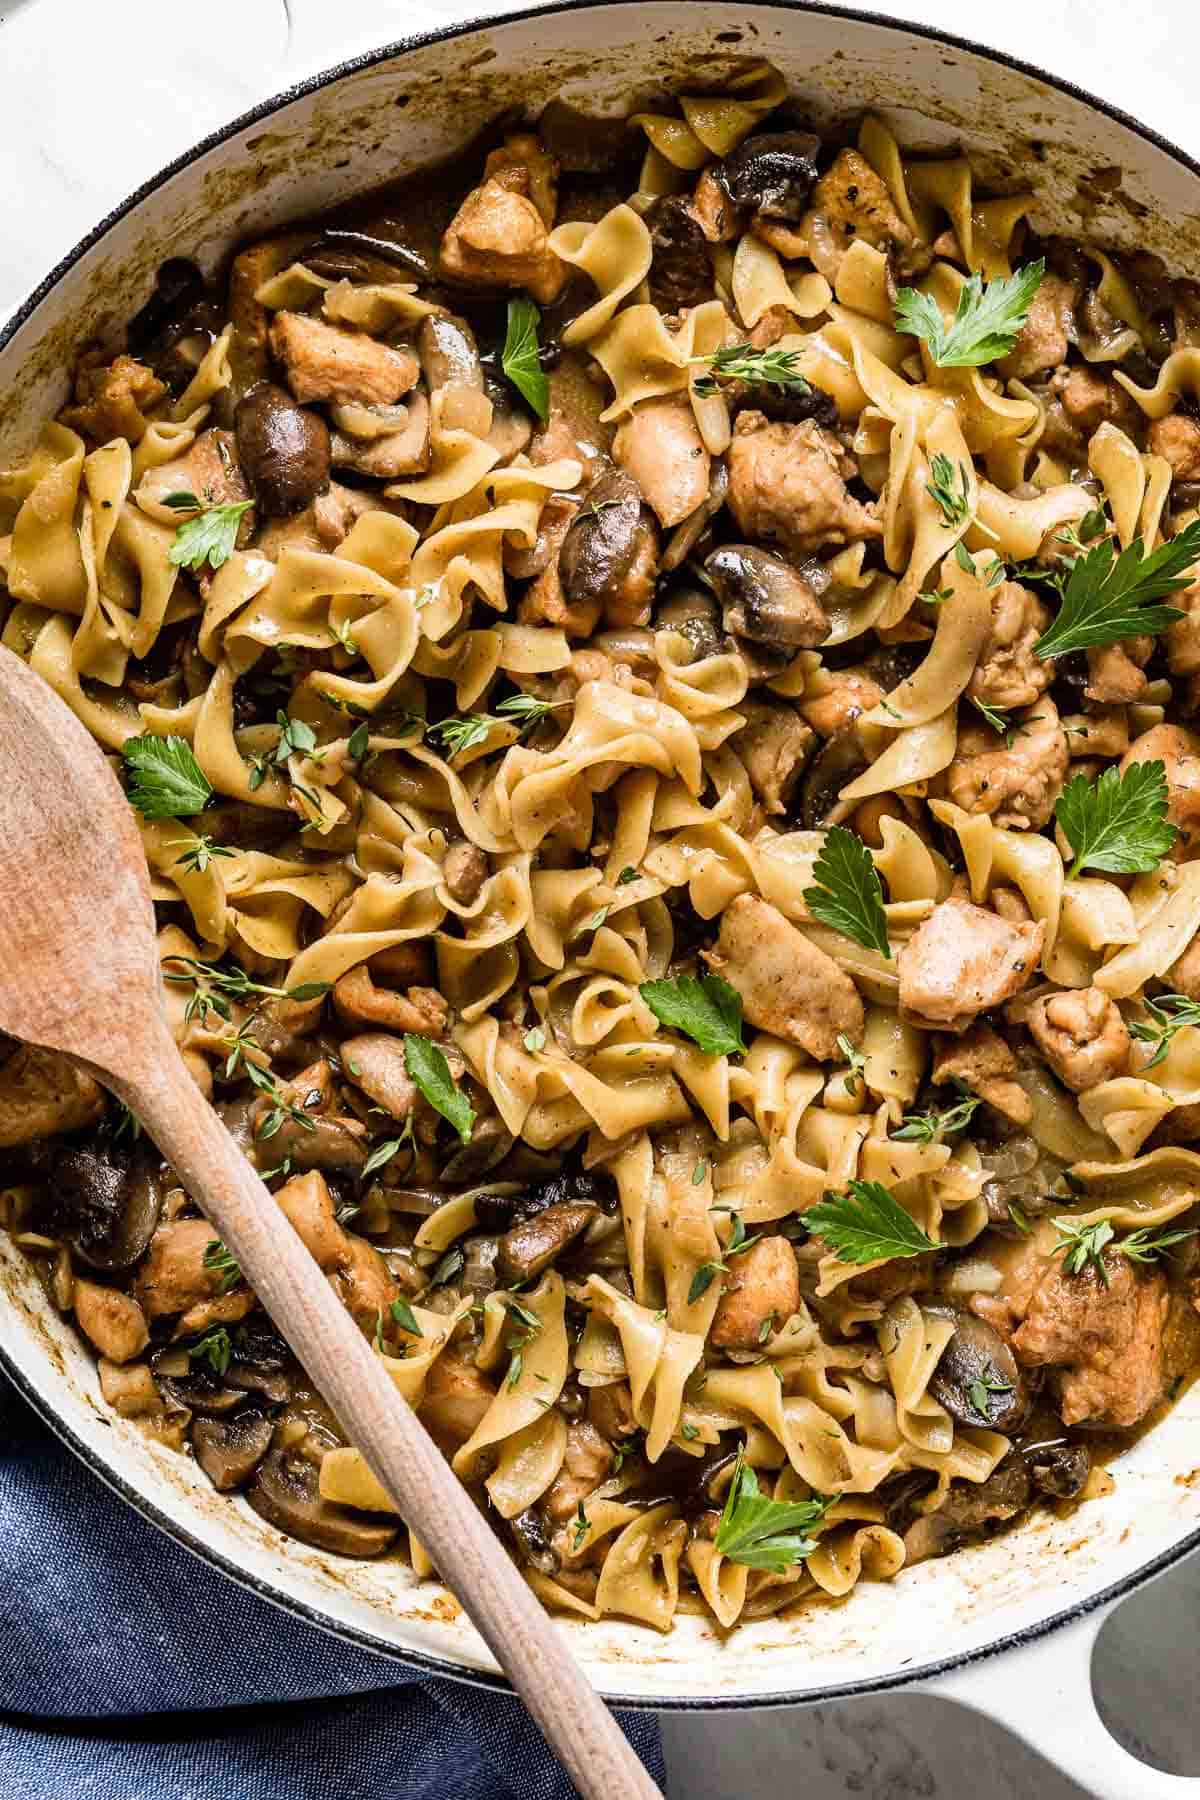 Chicken stroganoff with mushrooms and egg noodles in a large pan.